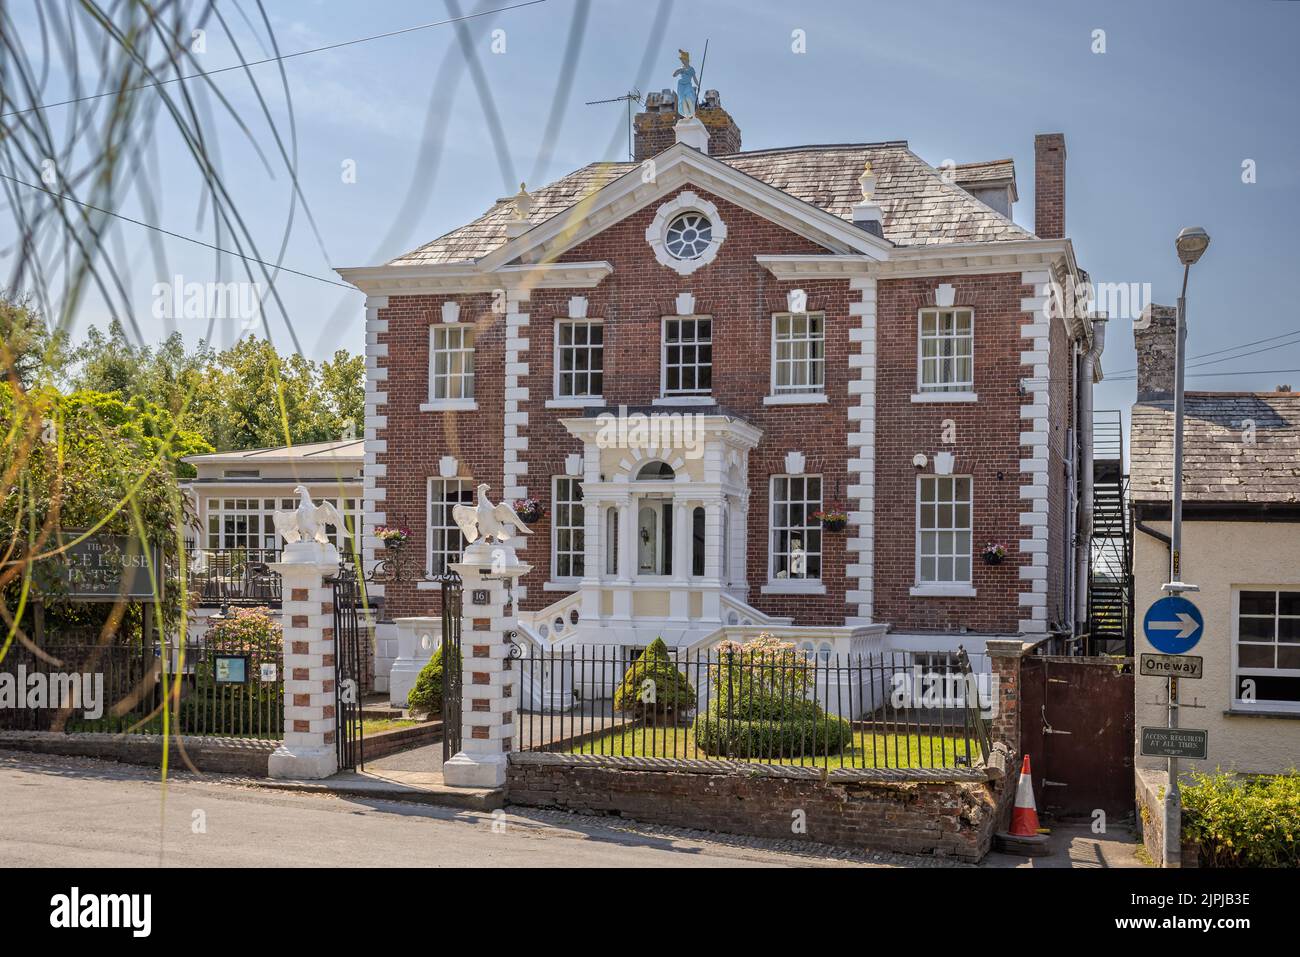 View of the front of The Eagle House Hotel - Georgian building built in 1764 - in Launceston, Cornwall, UK on 13 August 2022 Stock Photo